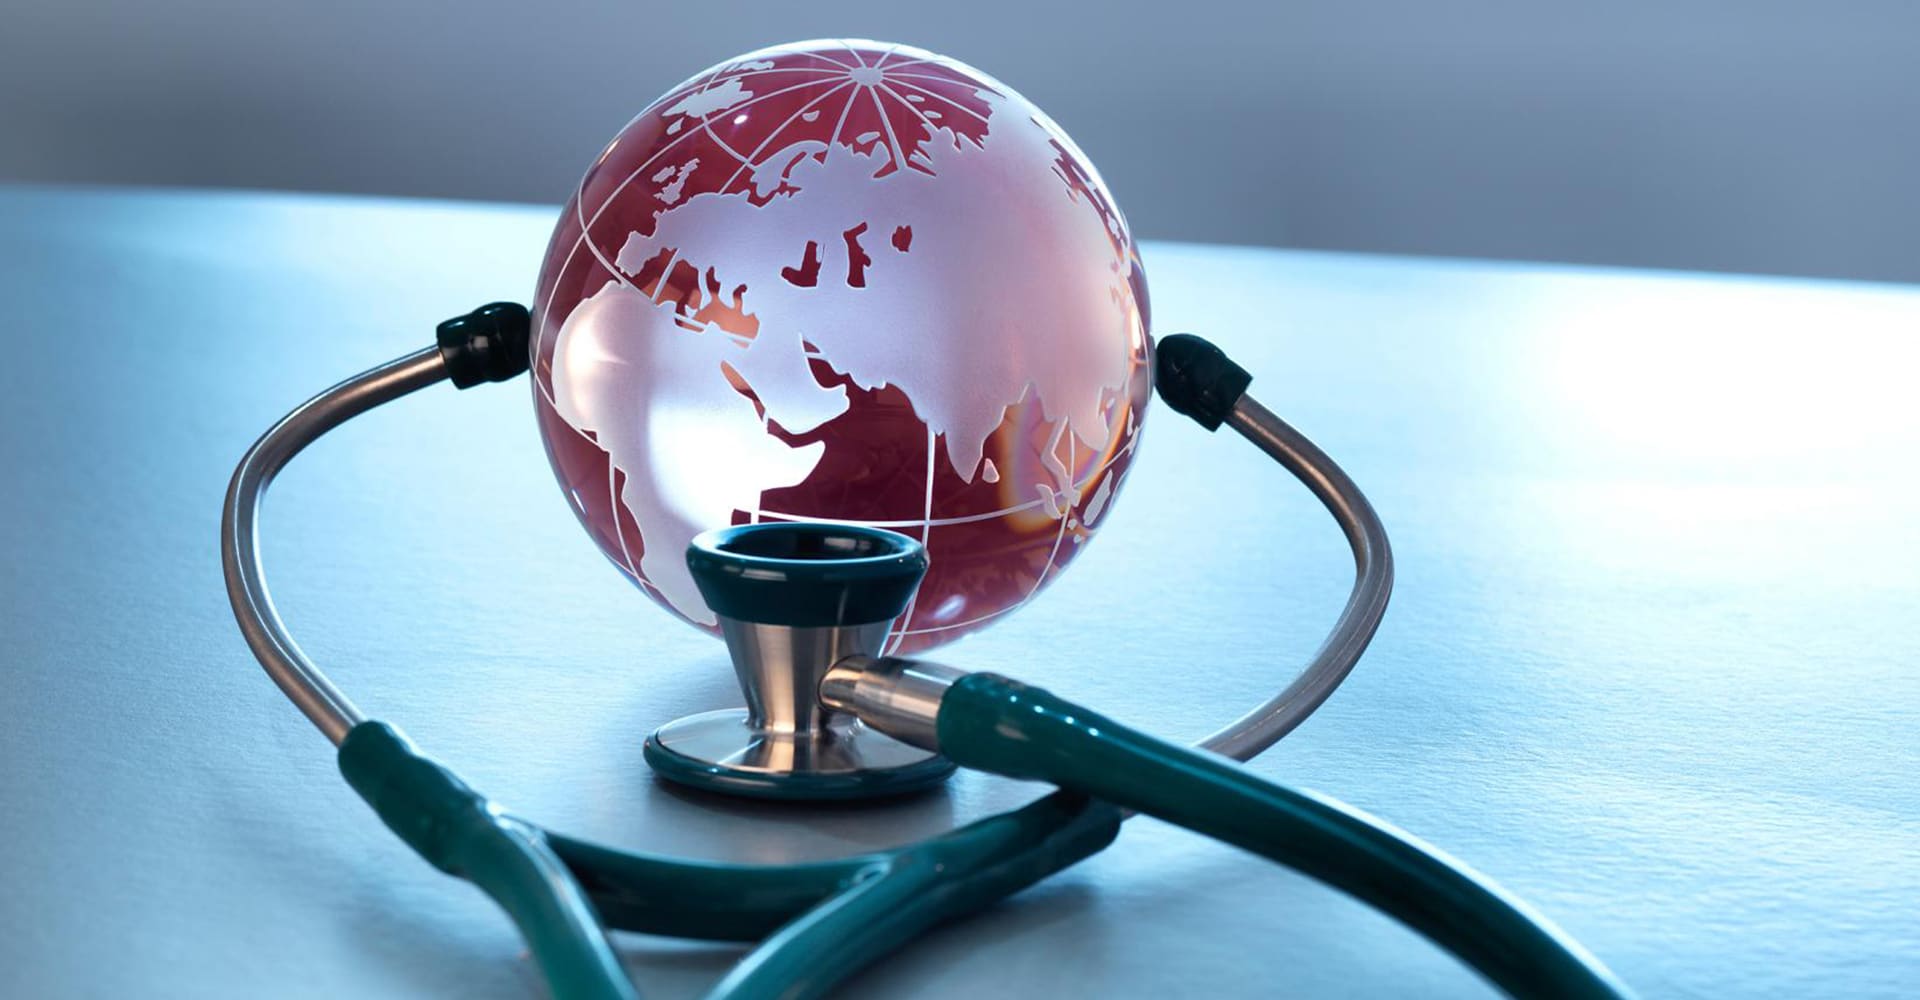 digital image of a stethoscope wrapped around a red glass globe on a light colored tabletop